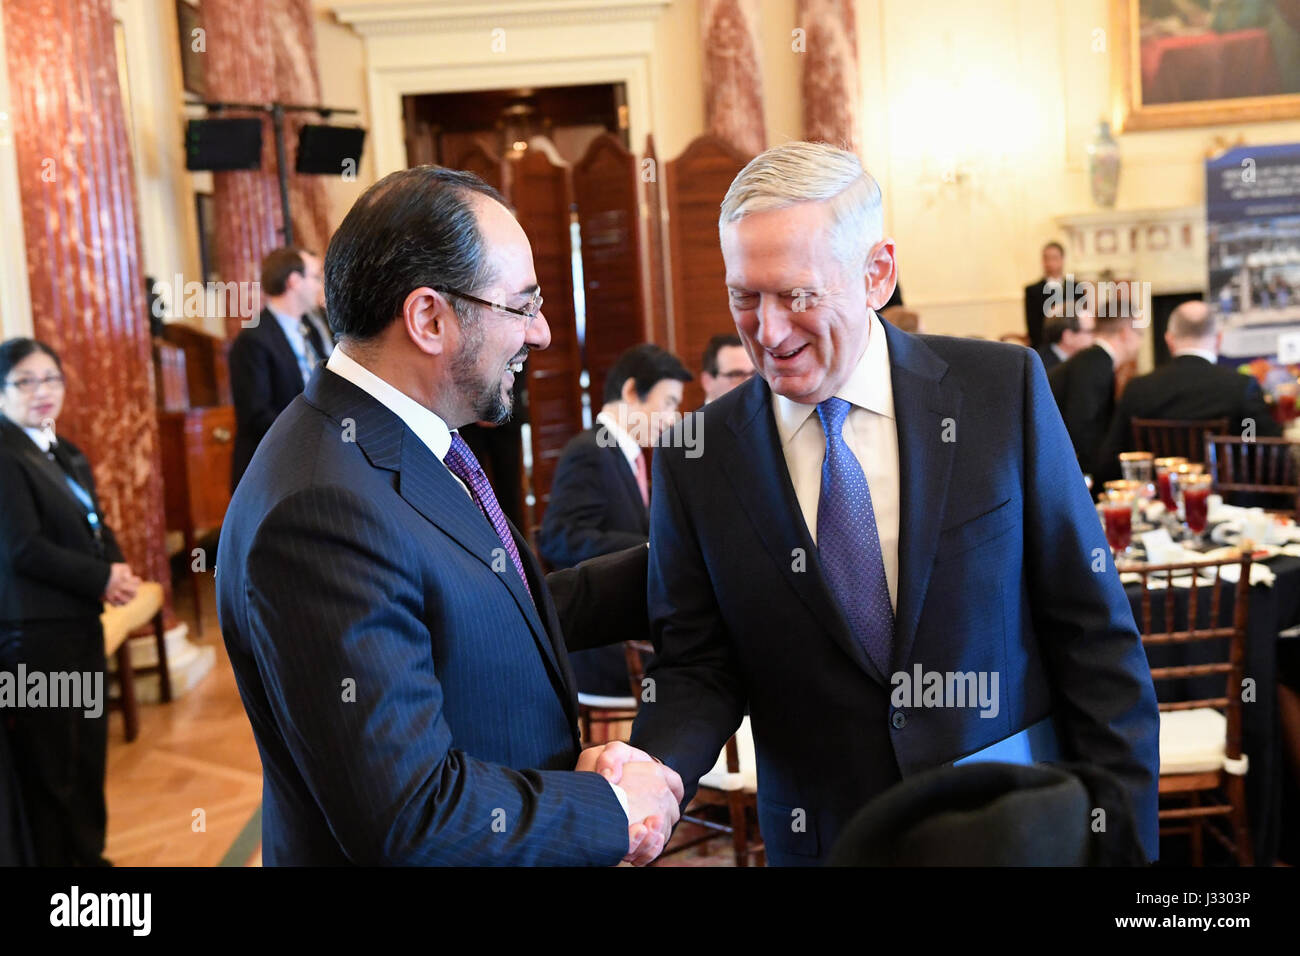 Secretary of Defense James Mattis chats with Afghan Foreign Minister Salahuddin Rabbani at the Ministerial Working Luncheon of the Global Coalition Working to Defeat ISIS at the U.S. Department of State in Washington, D.C. on March 22, 2017. Stock Photo